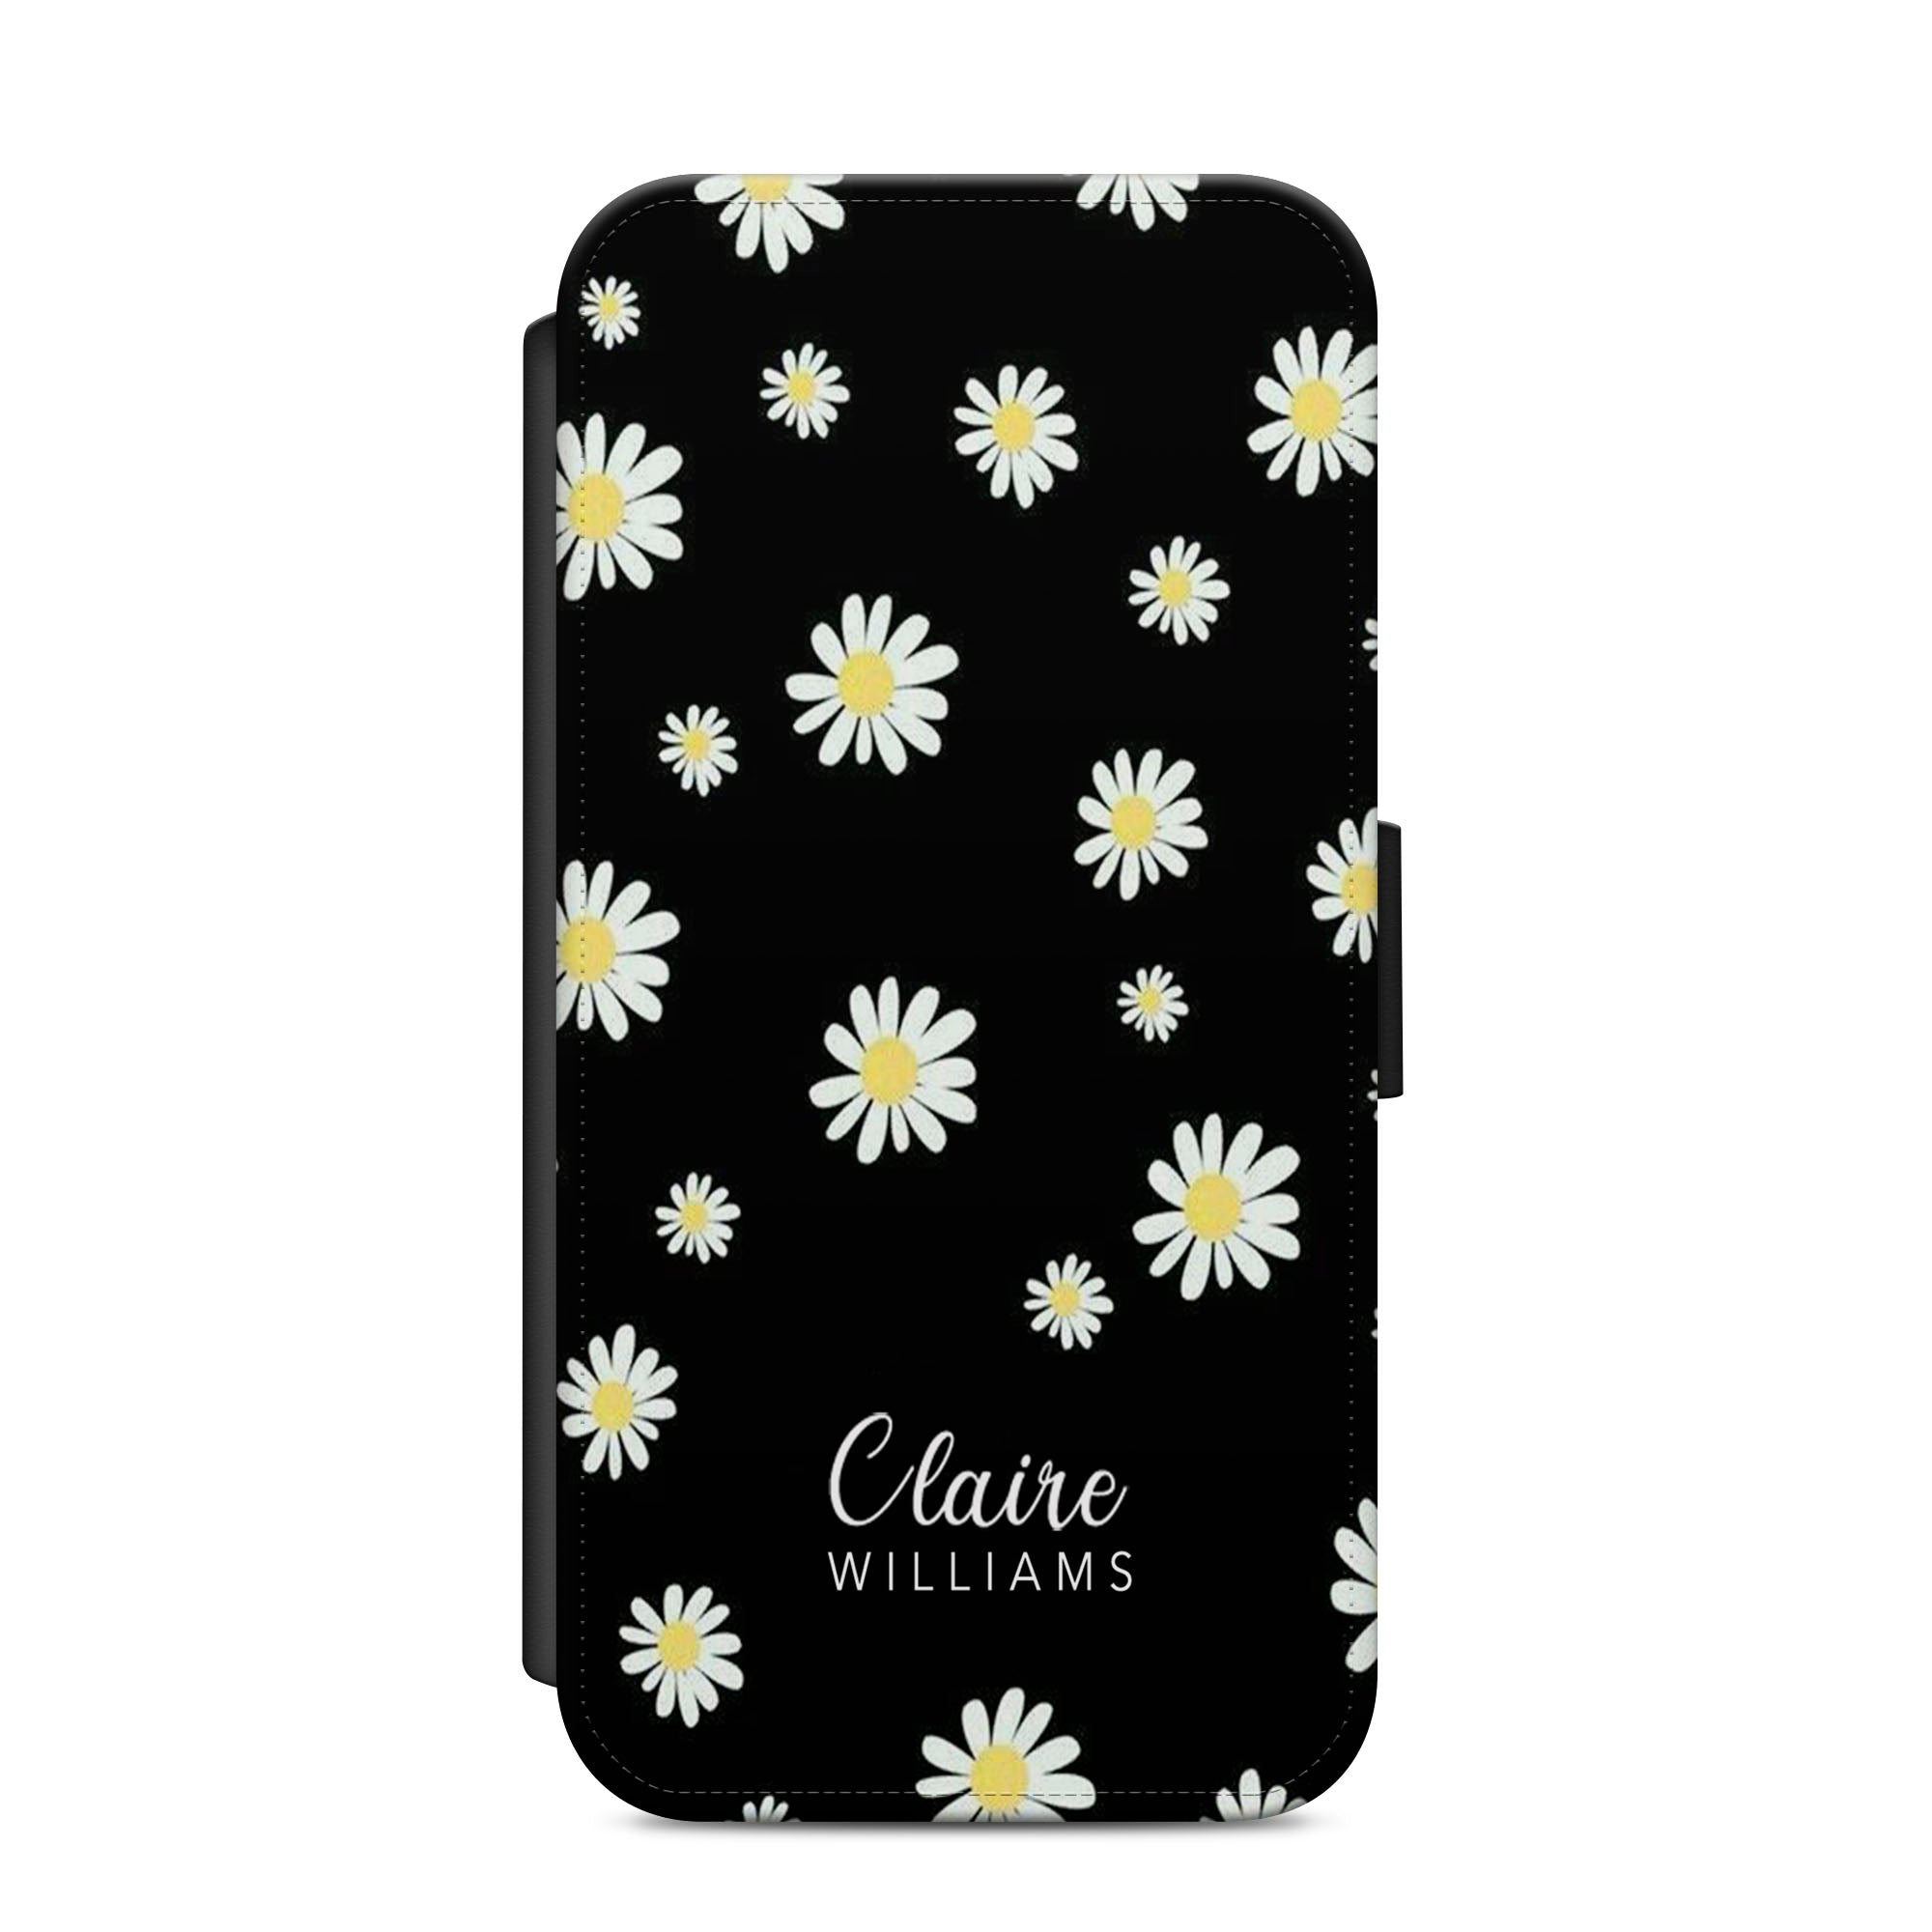 Personalised Daisy Faux Leather Flip Case Wallet for iPhone / Samsung